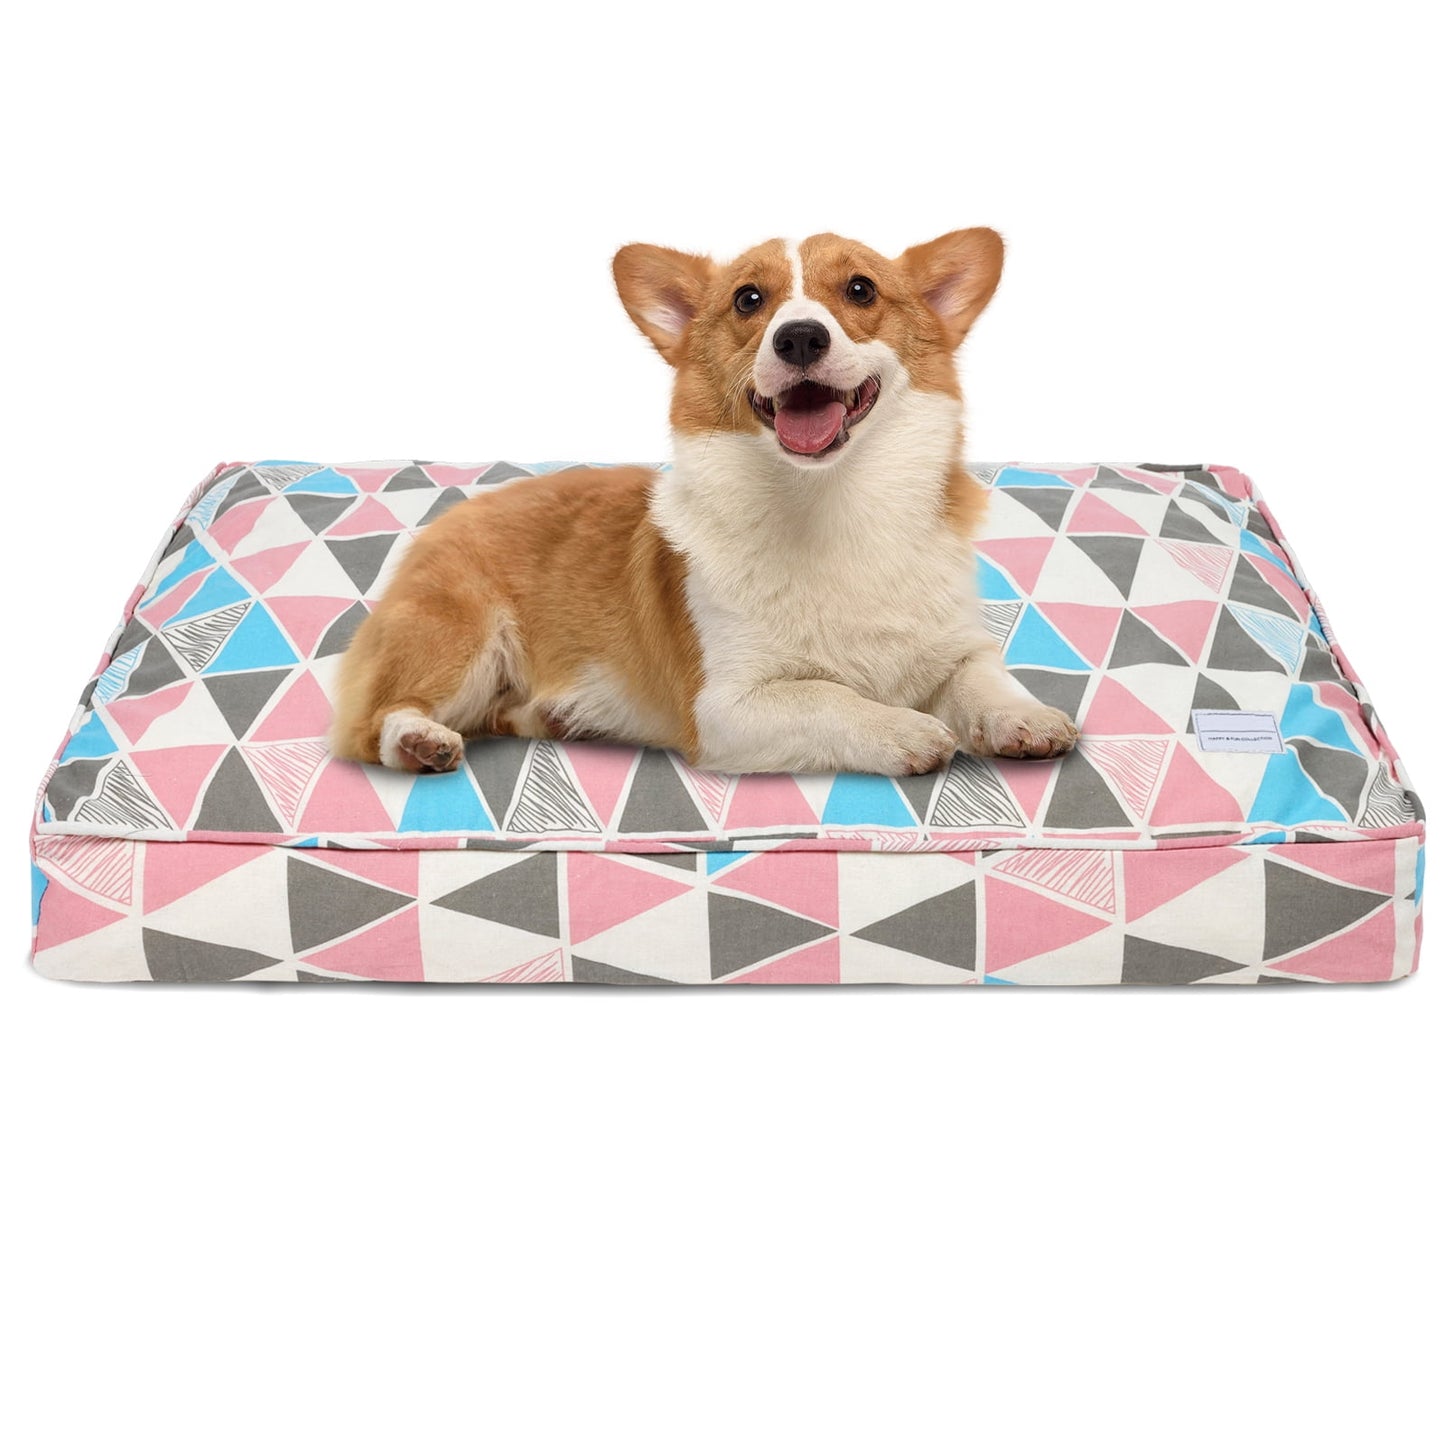 Exclusivo Mezcla Orthopedic Dog Bed for Small Dogs, Shredded Memory Foam Supportive Therapy Fillings Pet Bed, Soft Warm Washable Cat Cuddler Bed, Triangle 24''x18''